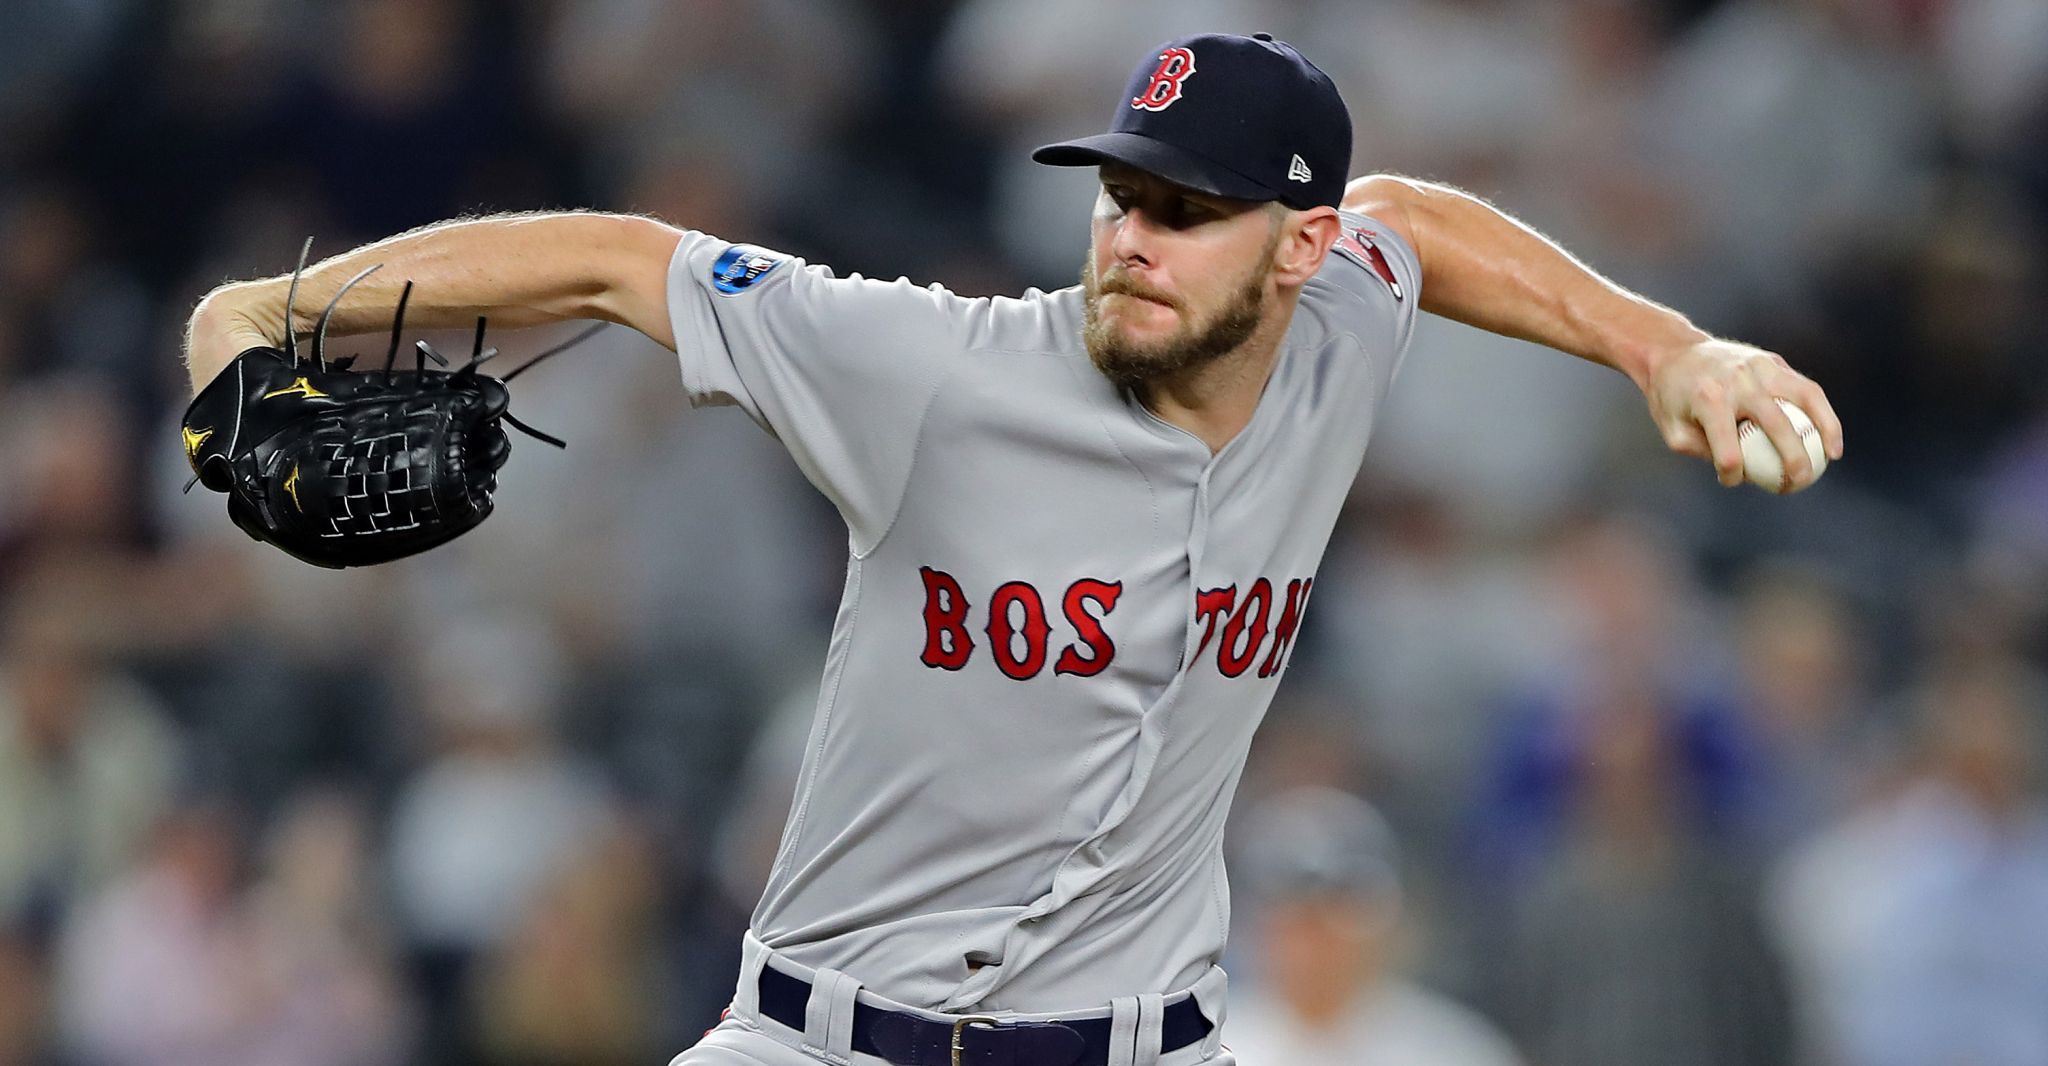 Sox ace Chris Sale will pitch in ALCS against Astros, but Cora won't  specify when